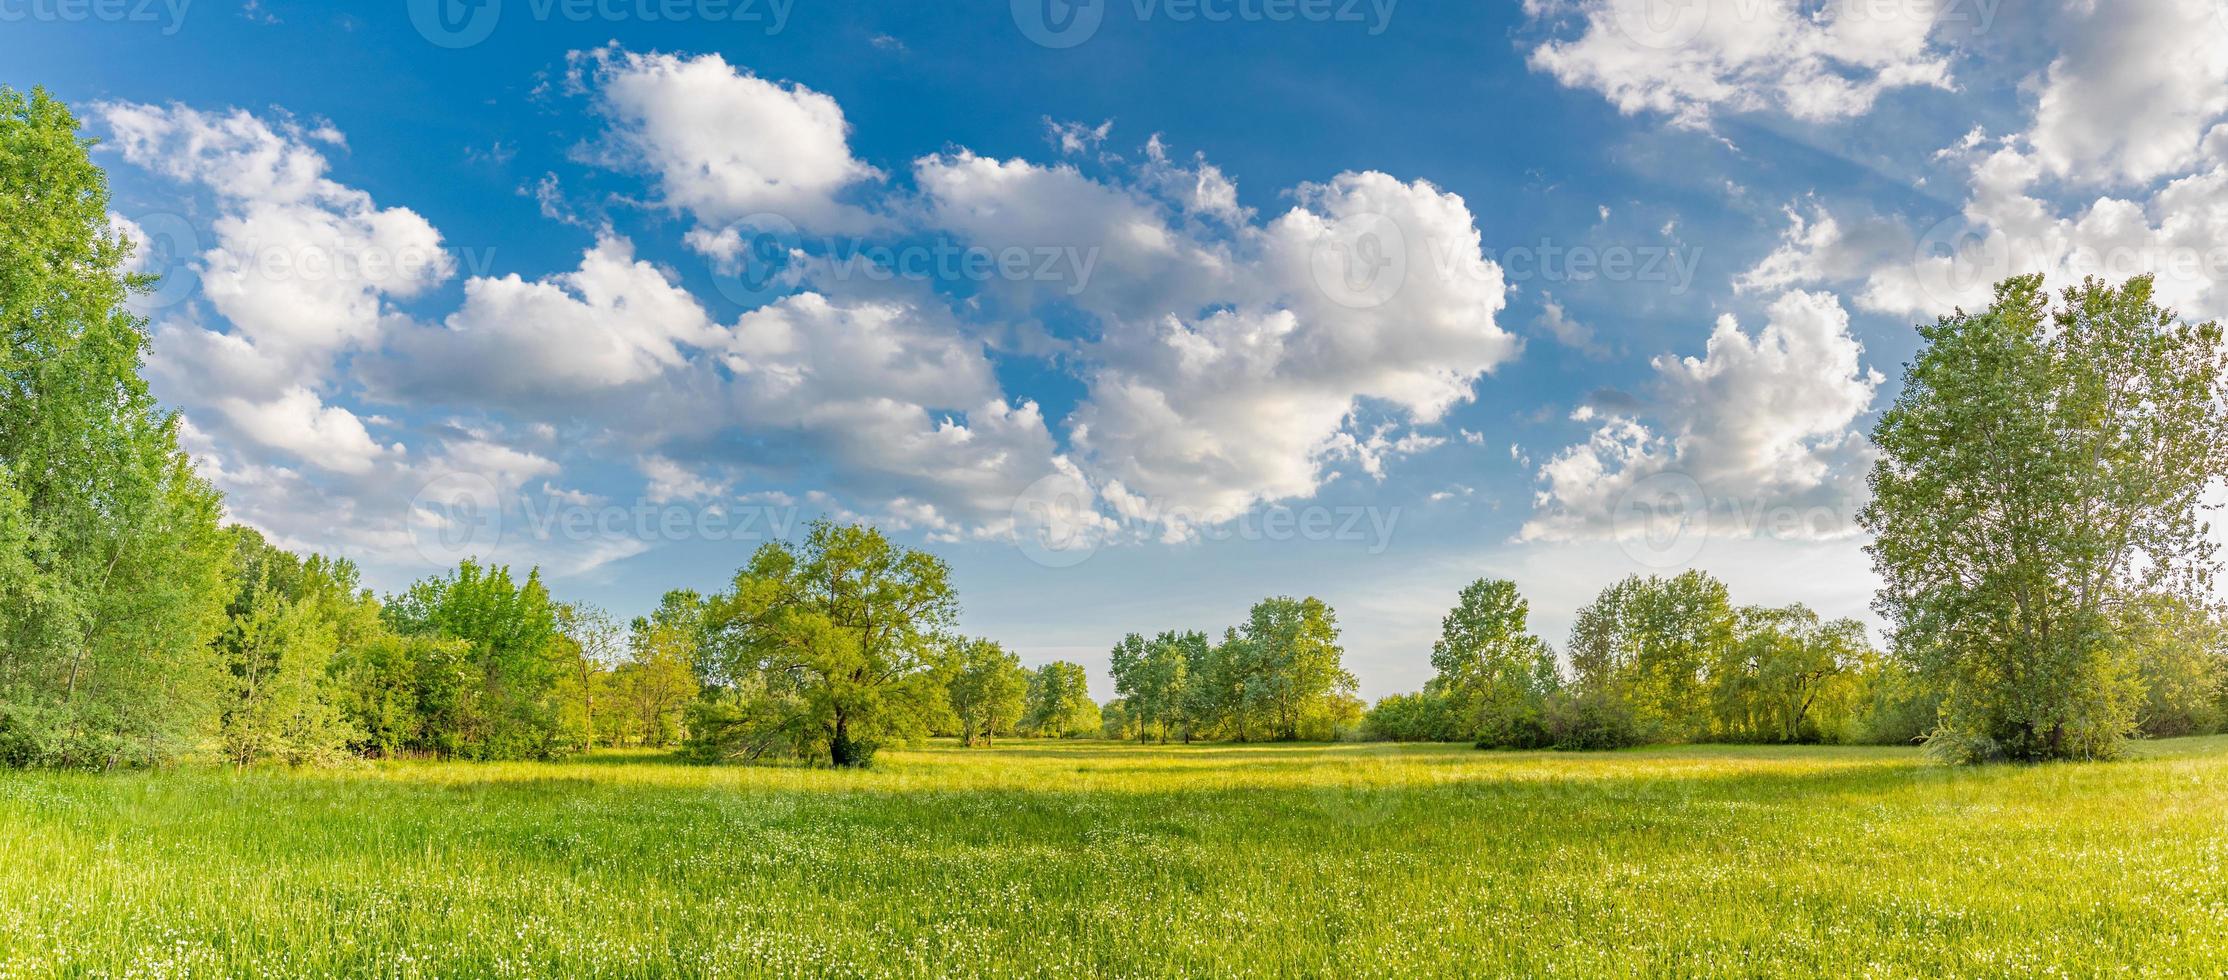 Idyllic mountain landscape with fresh green meadows and blooming wildflowers. Idyllic nature countryside view, rural outdoor natural view. idyllic banner nature, panoramic spring summer scenery photo